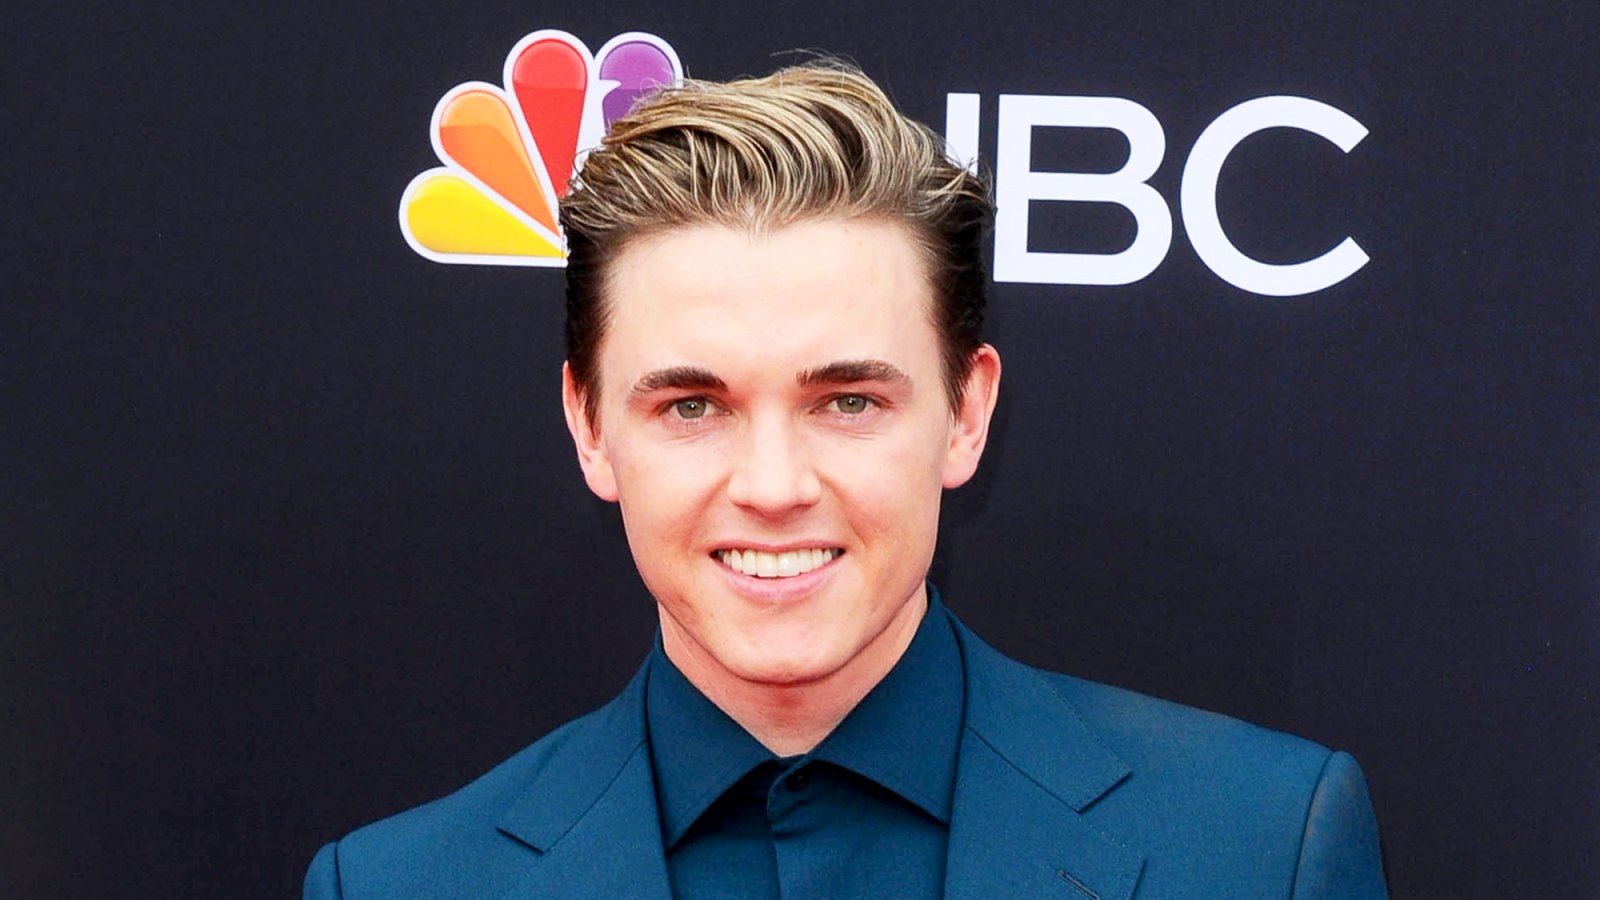 Jesse McCartney attends the 2018 Billboard Music Awards at MGM Grand Garden Arena in Las Vegas, Nevada.